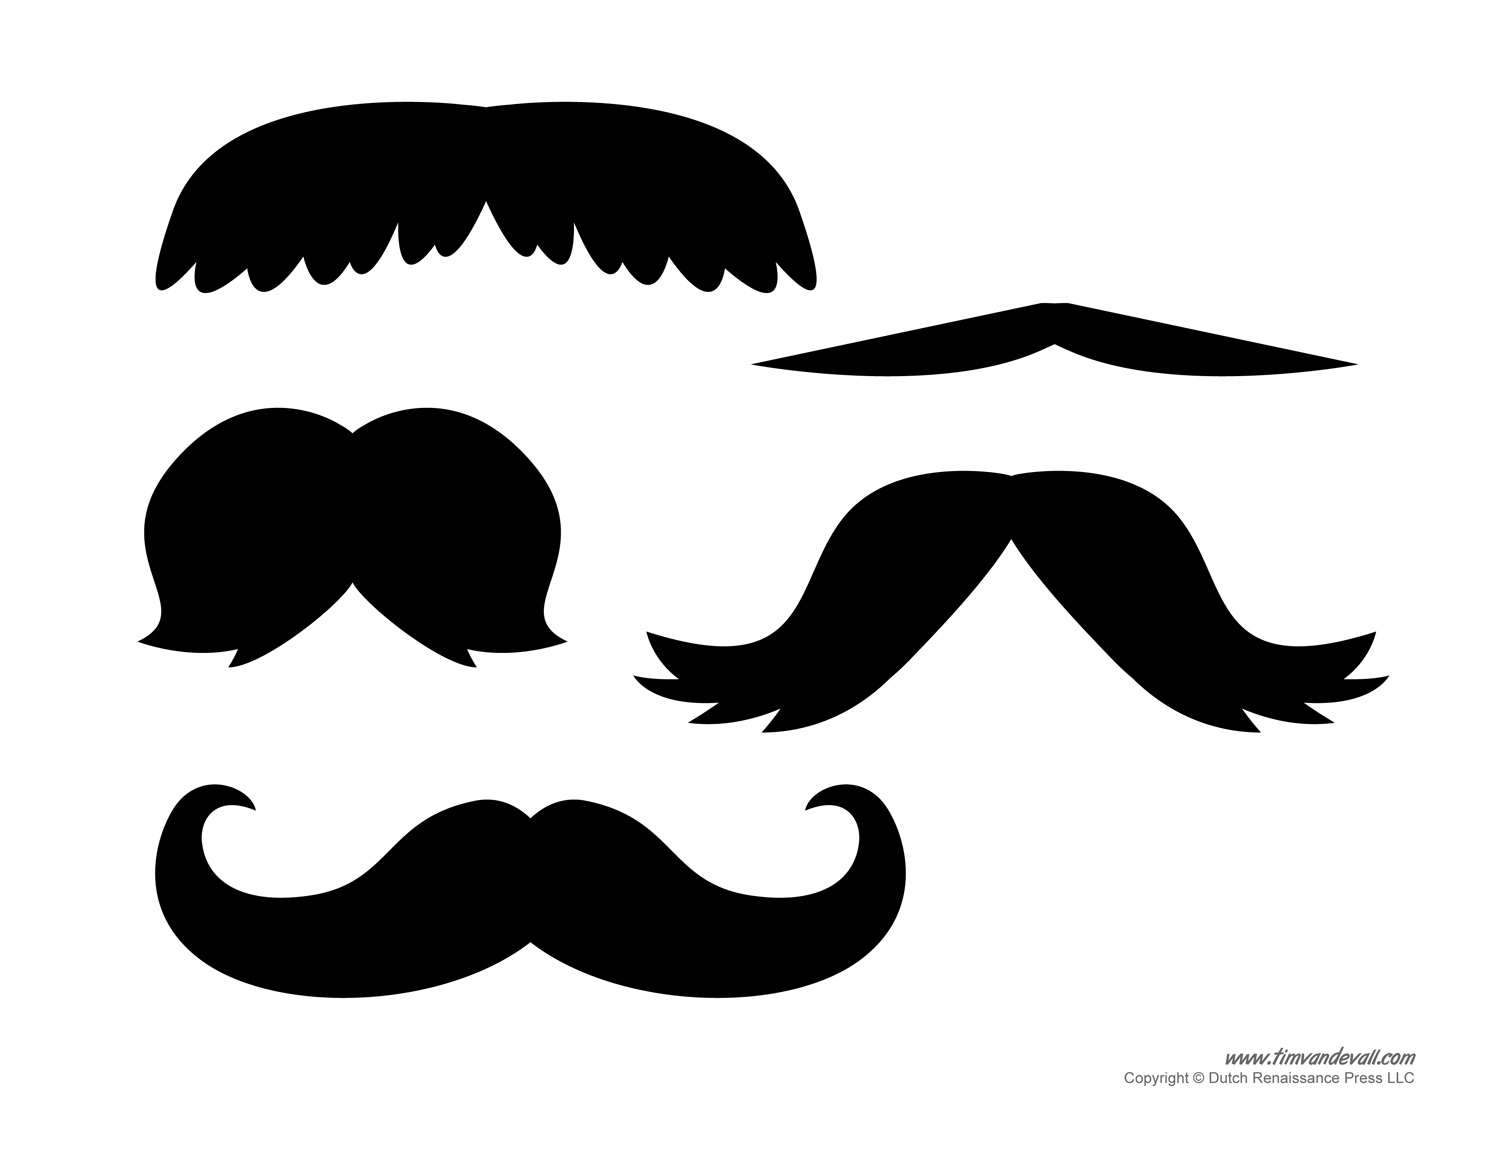 Printable mustache templates mustaches for kids â tims printables